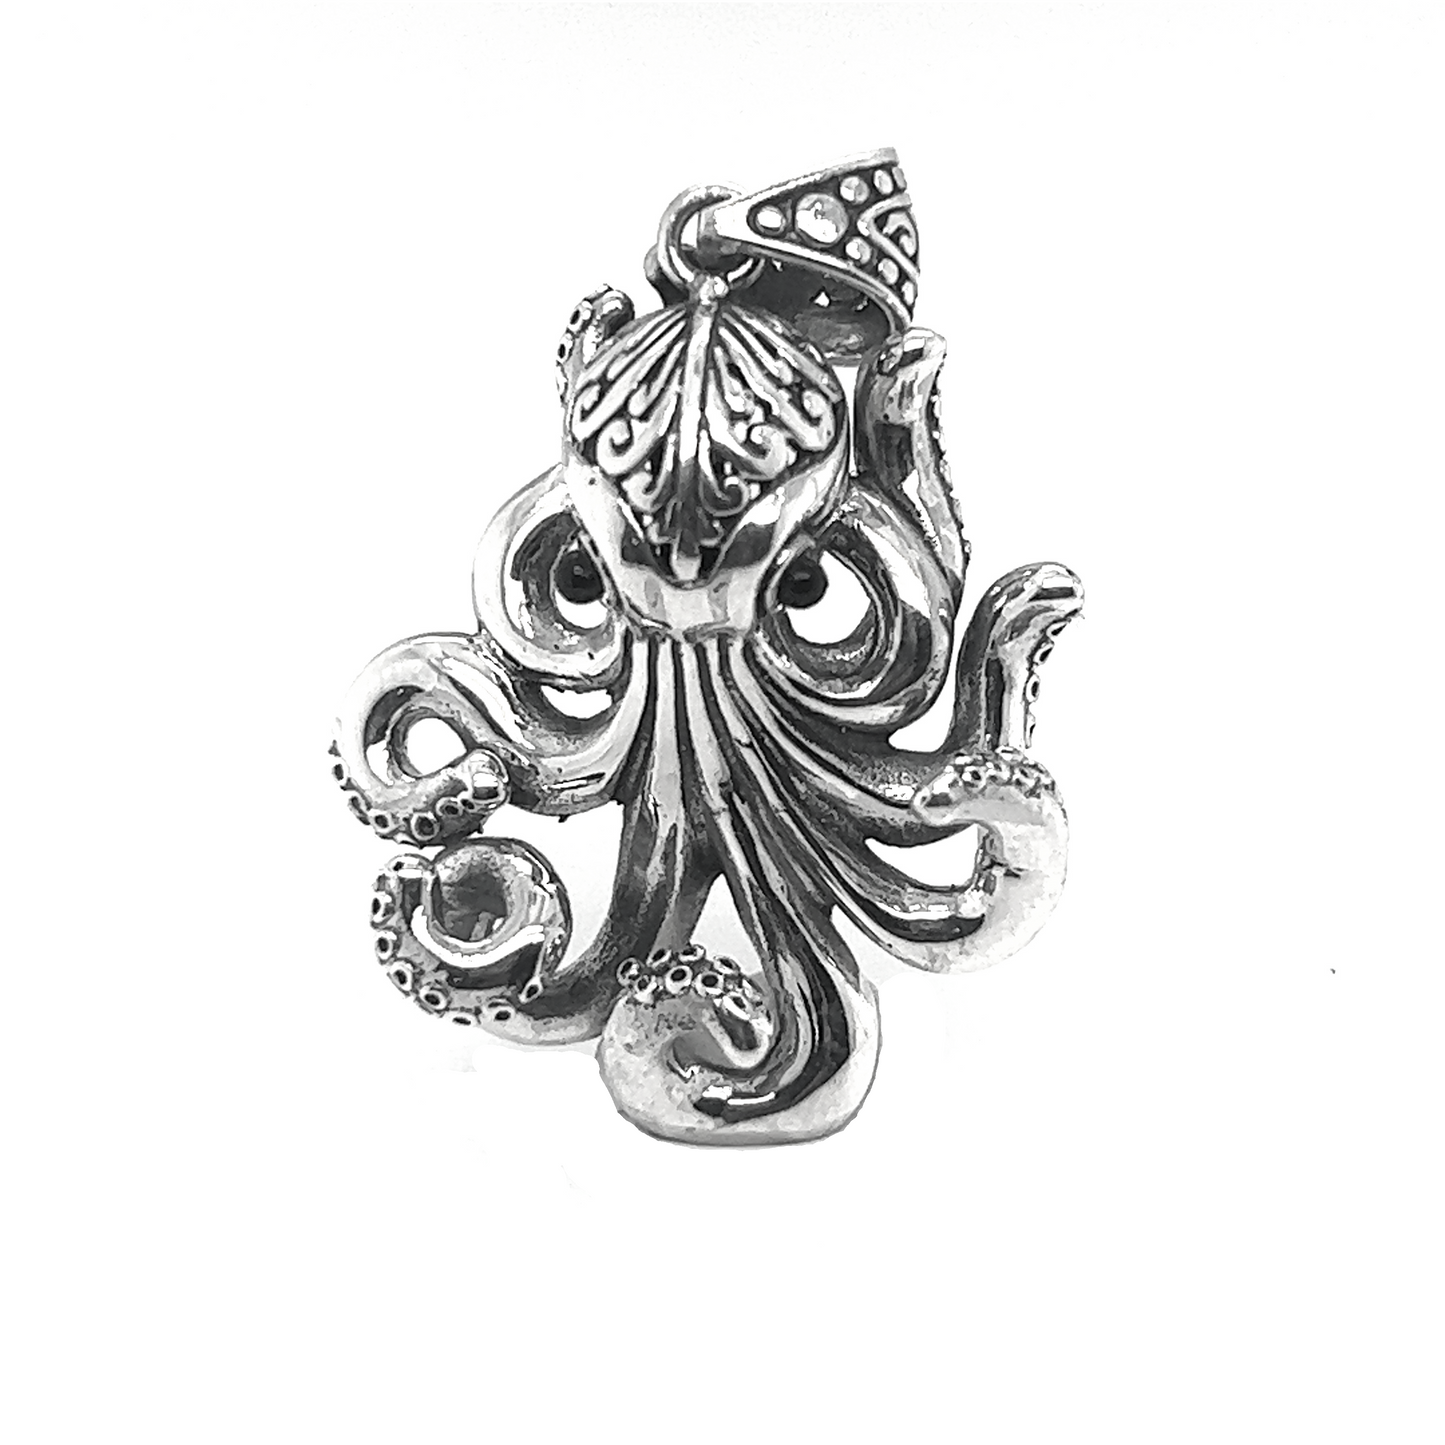 An Exquisite Octopus Pendant by Super Silver on a white background.